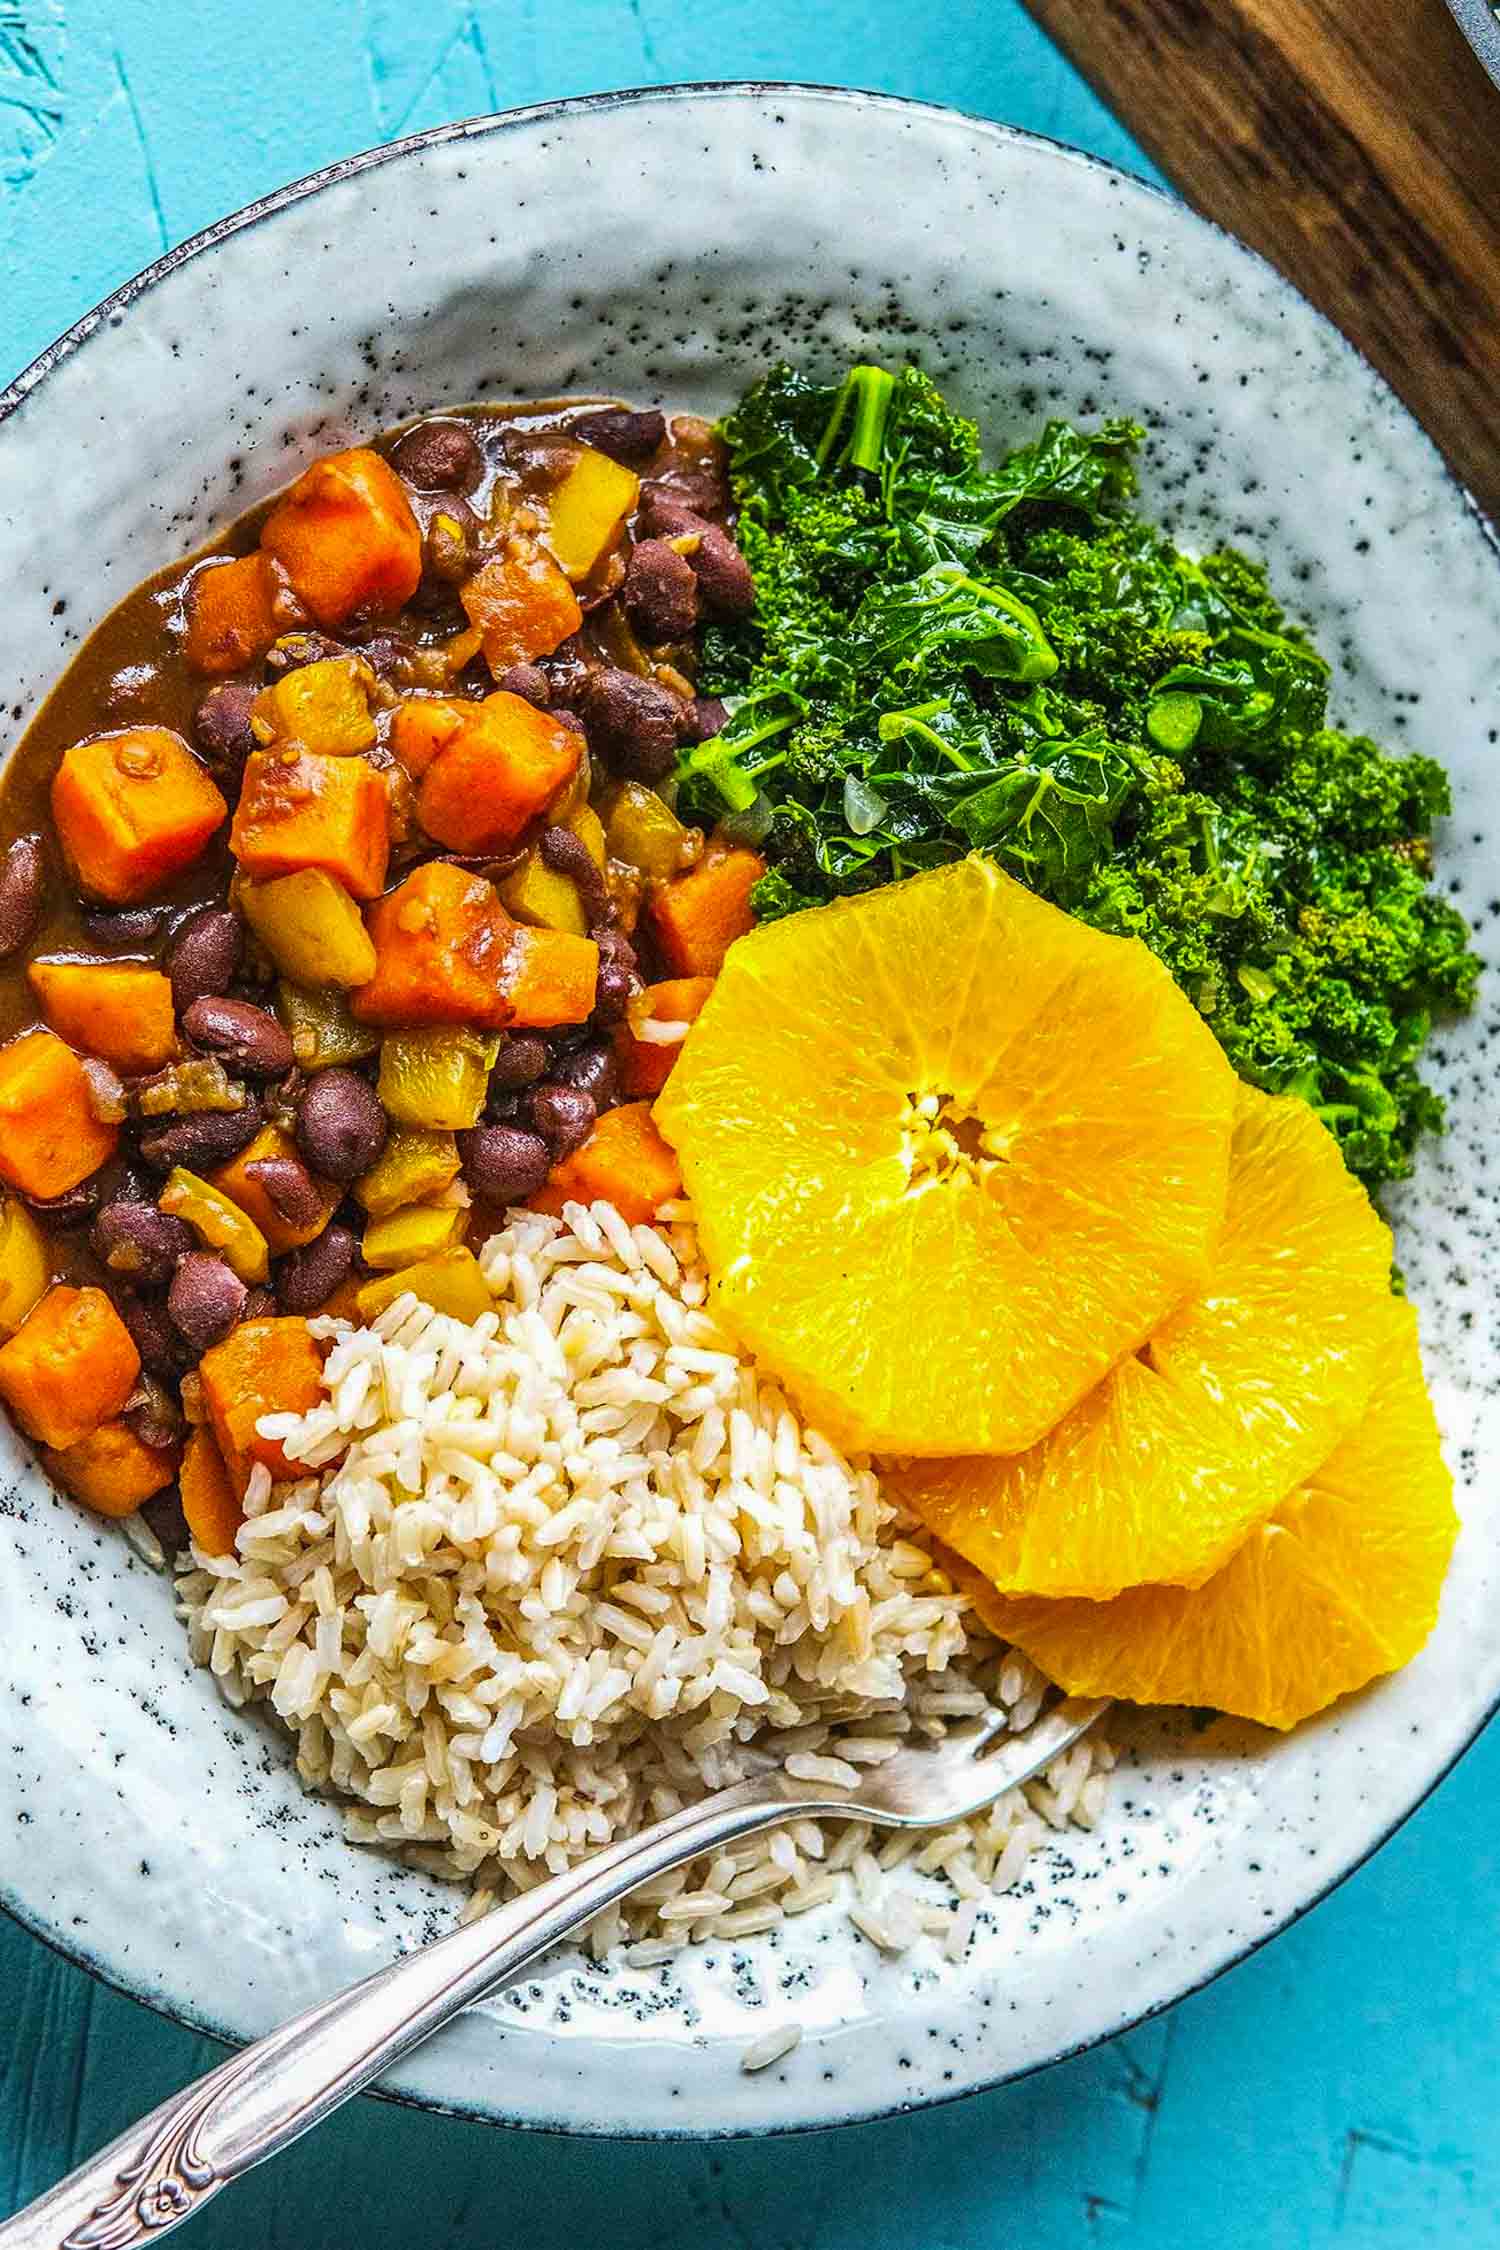 Vegetarian feijoada, a black bean stew with squash on white plate with kale and sliced oranges on a turquoise background.